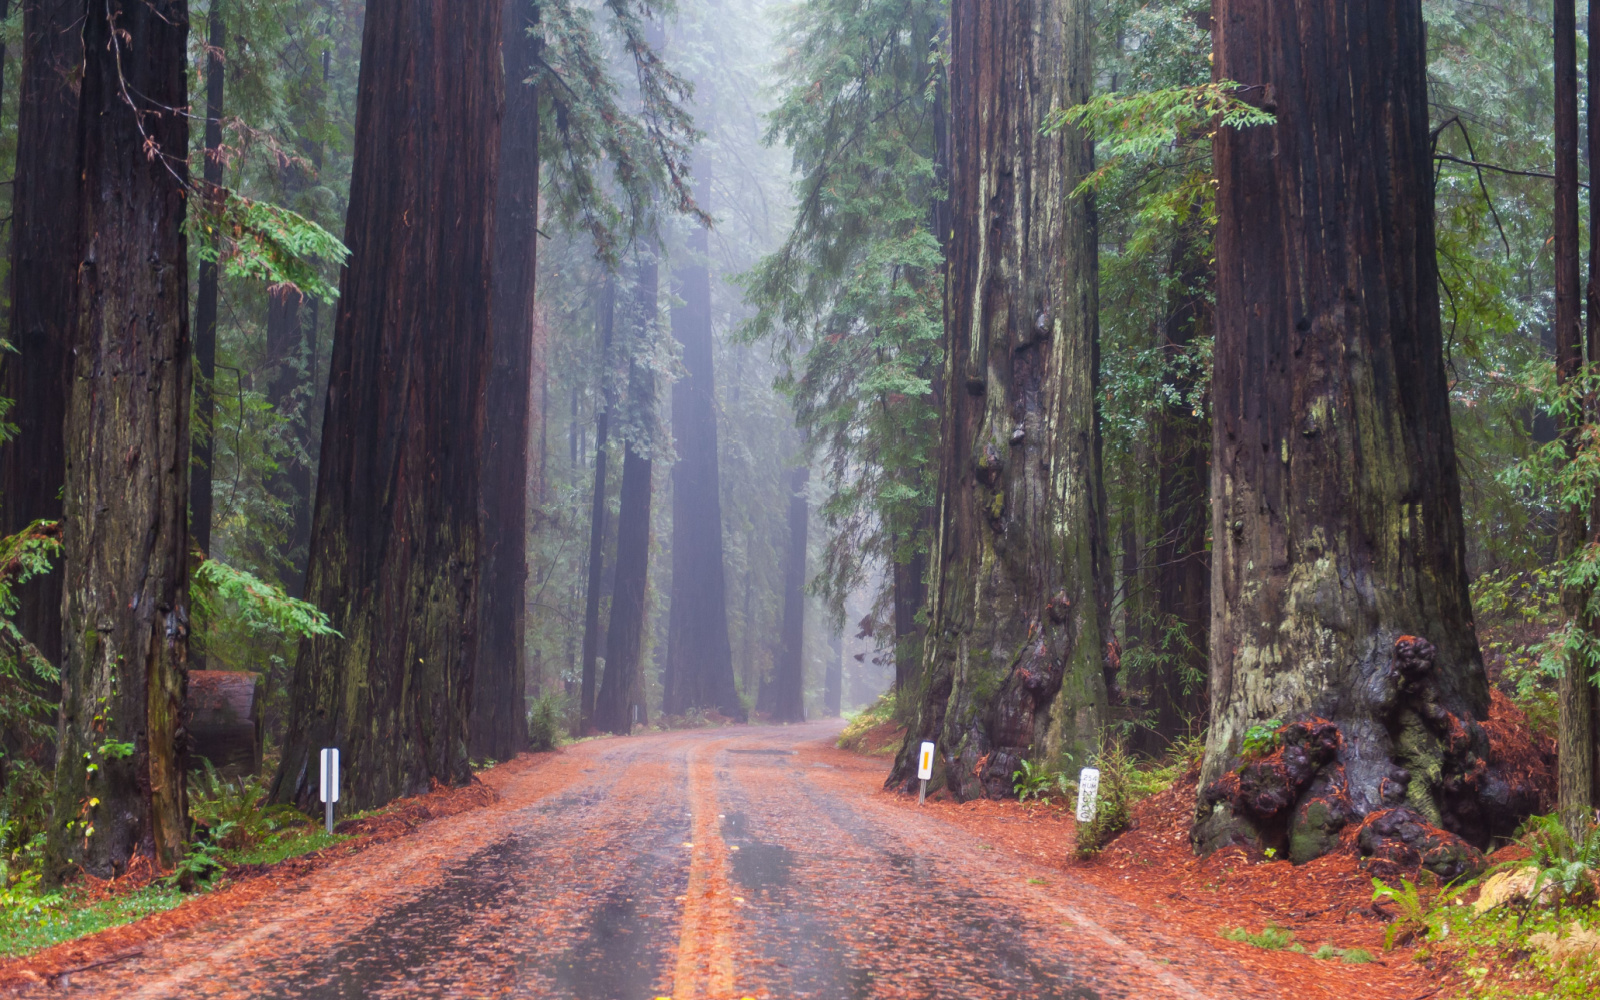 The Best Time to Visit Redwood National Park